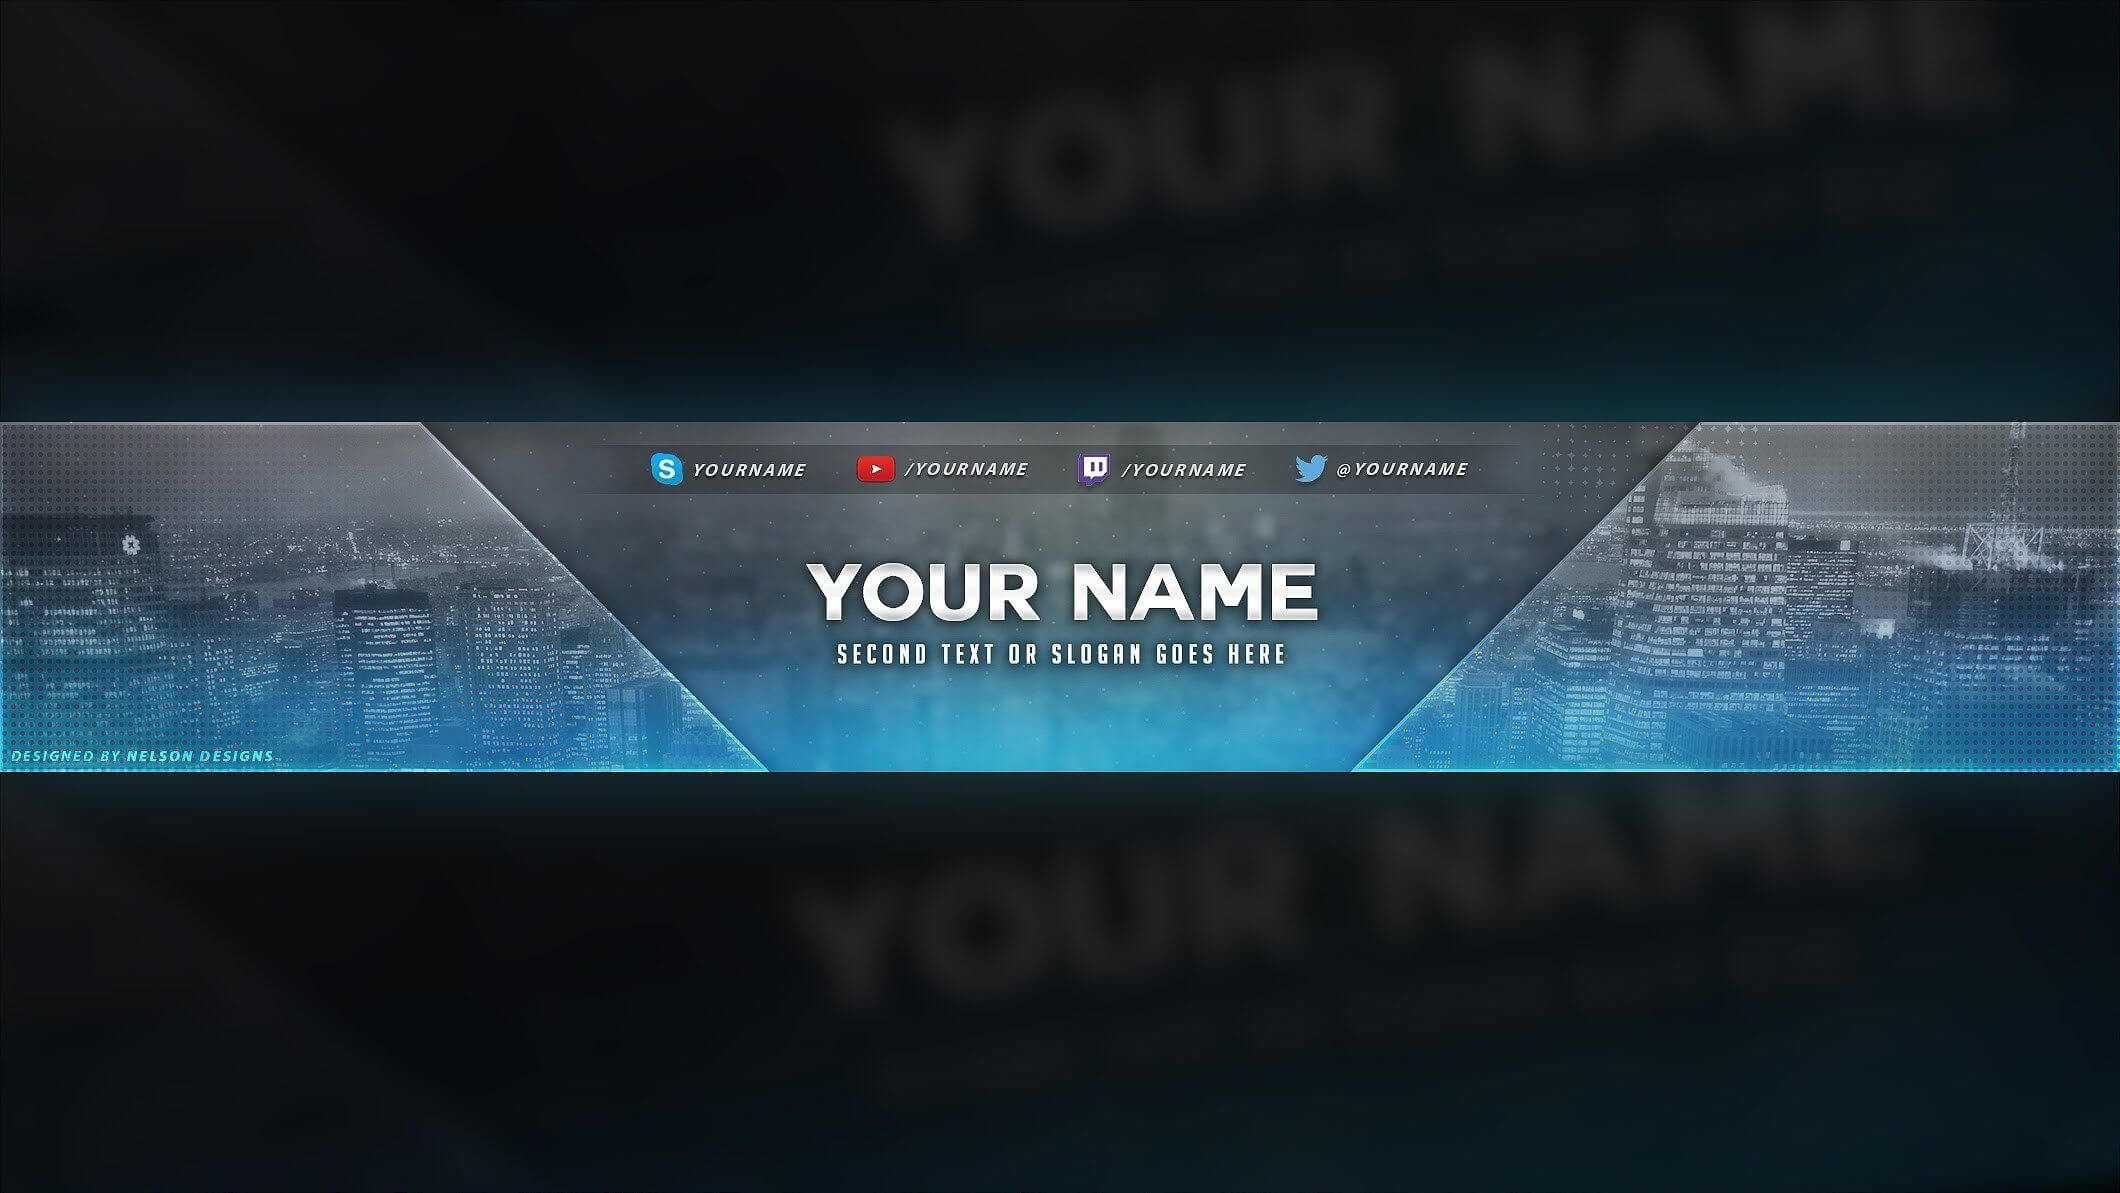 4 Free Youtube Banner Psd Template Designs Social Media Pertaining To